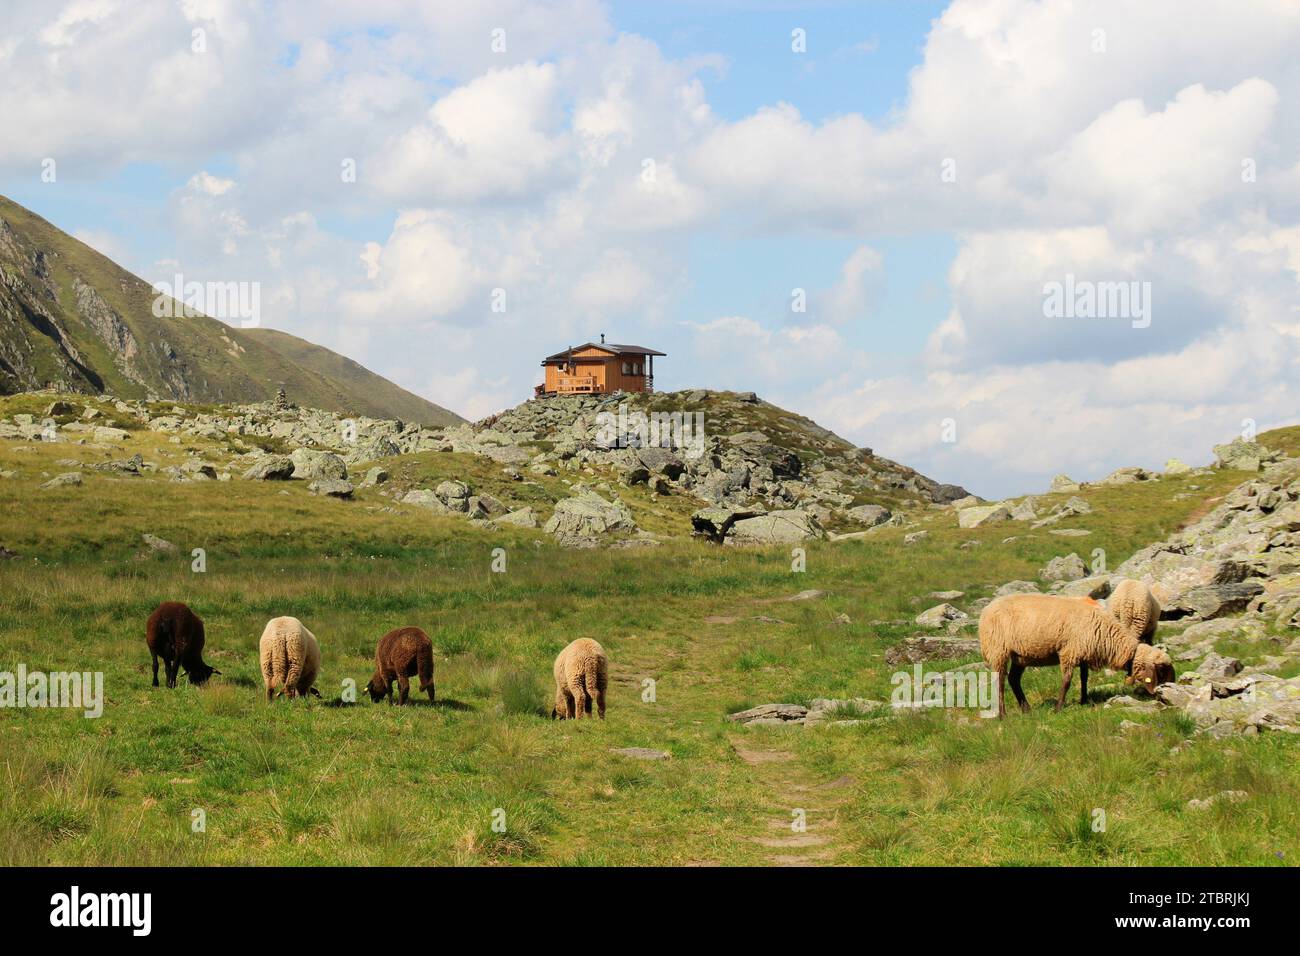 Mountain sheep grazing peacefully in front of a mountain hut on the hiking trail to Hundstaller See (2289m), hiking tour near Inzing, Innsbruck Land, Stock Photo